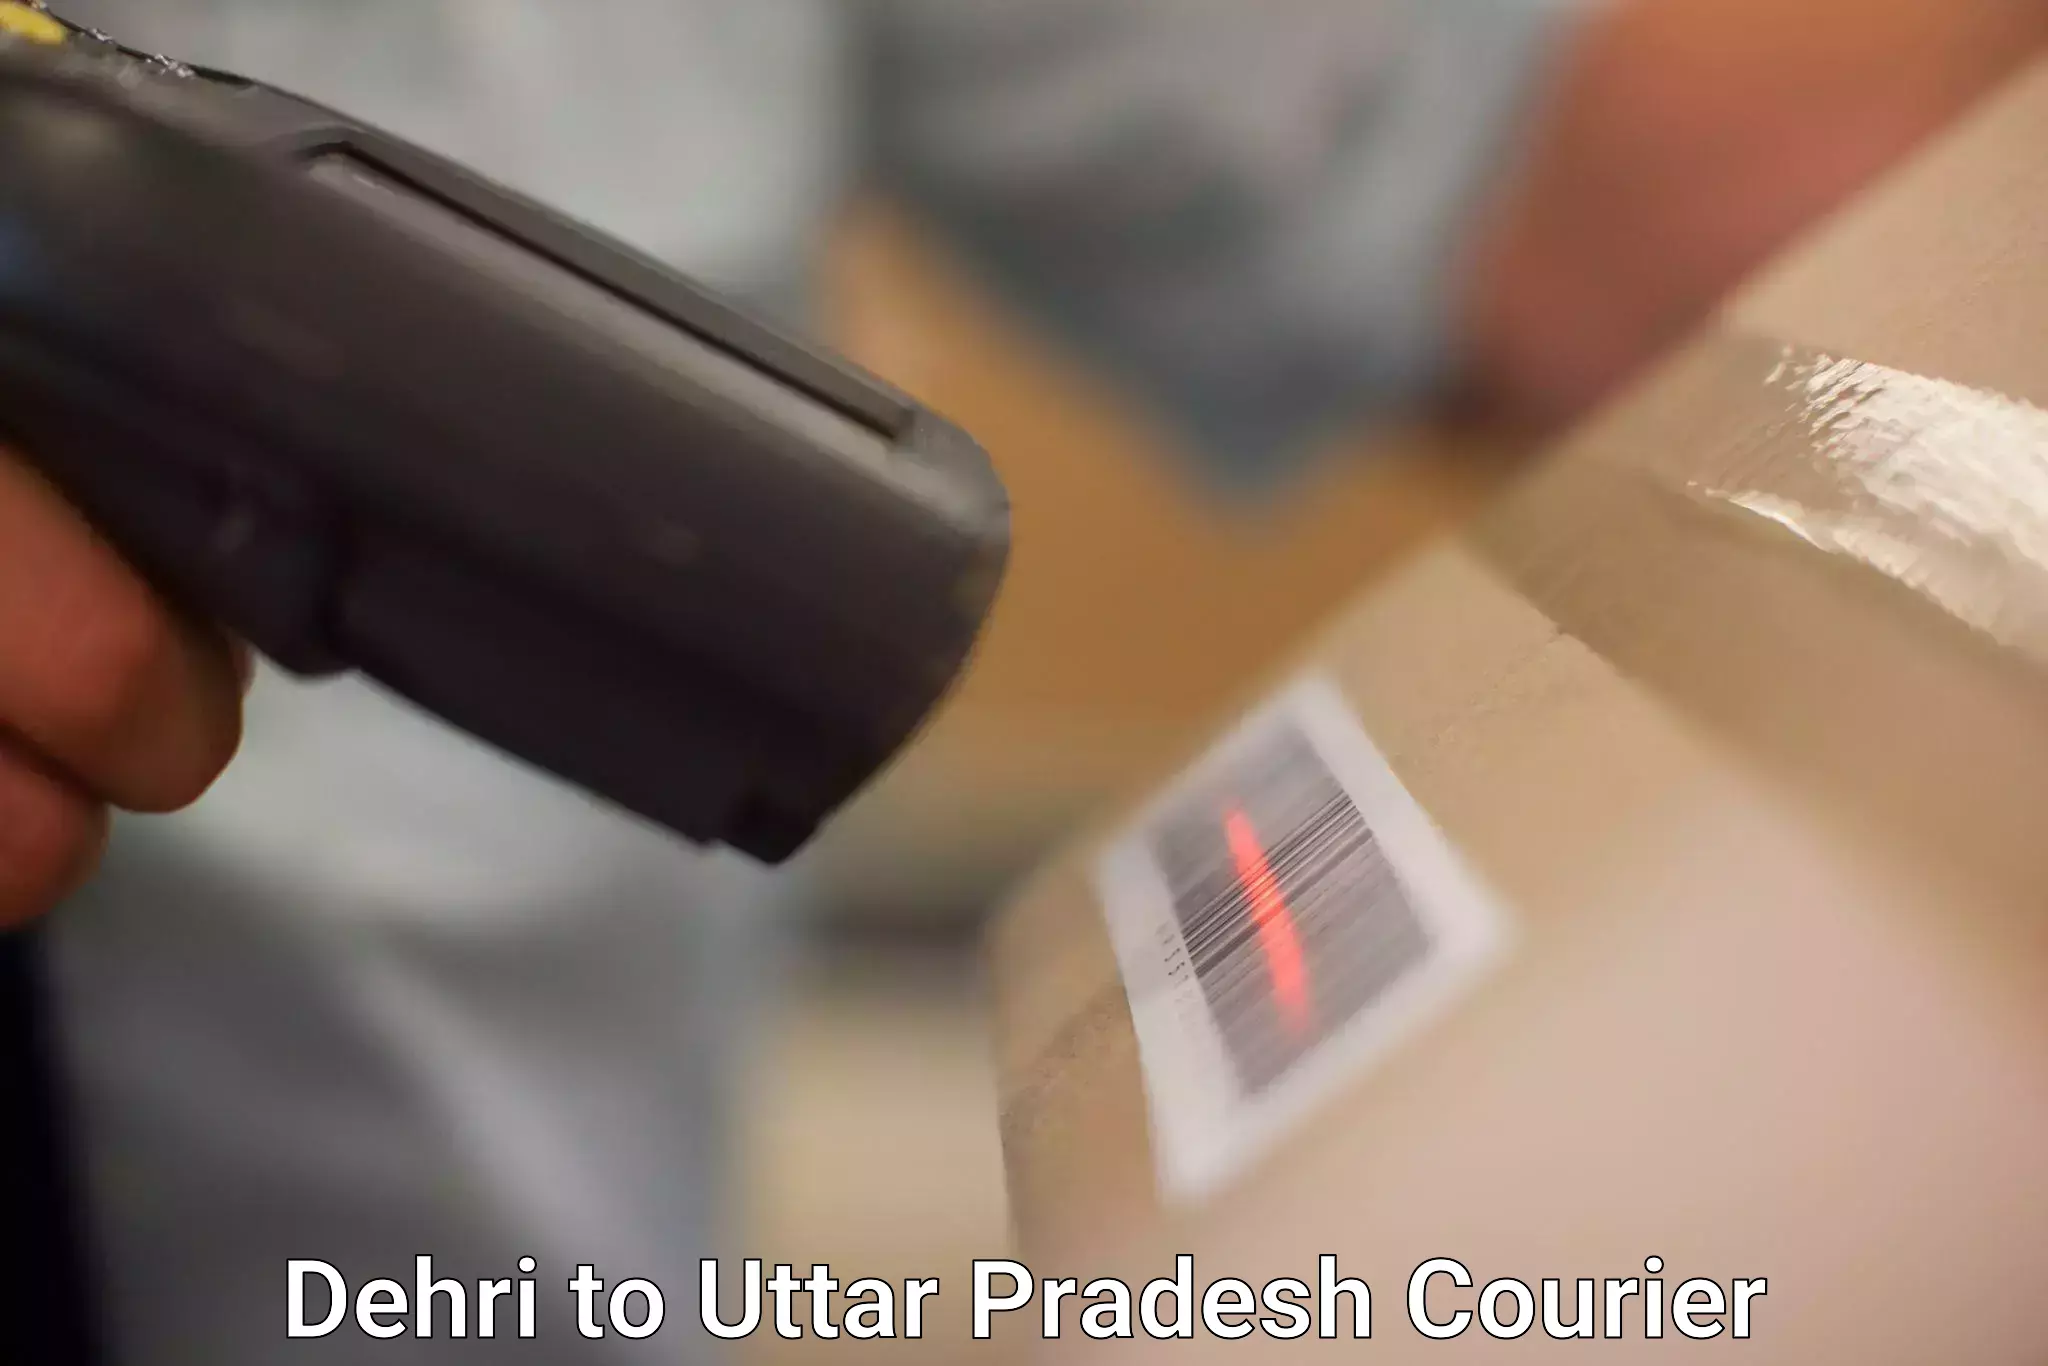 Easy access courier services Dehri to Agra